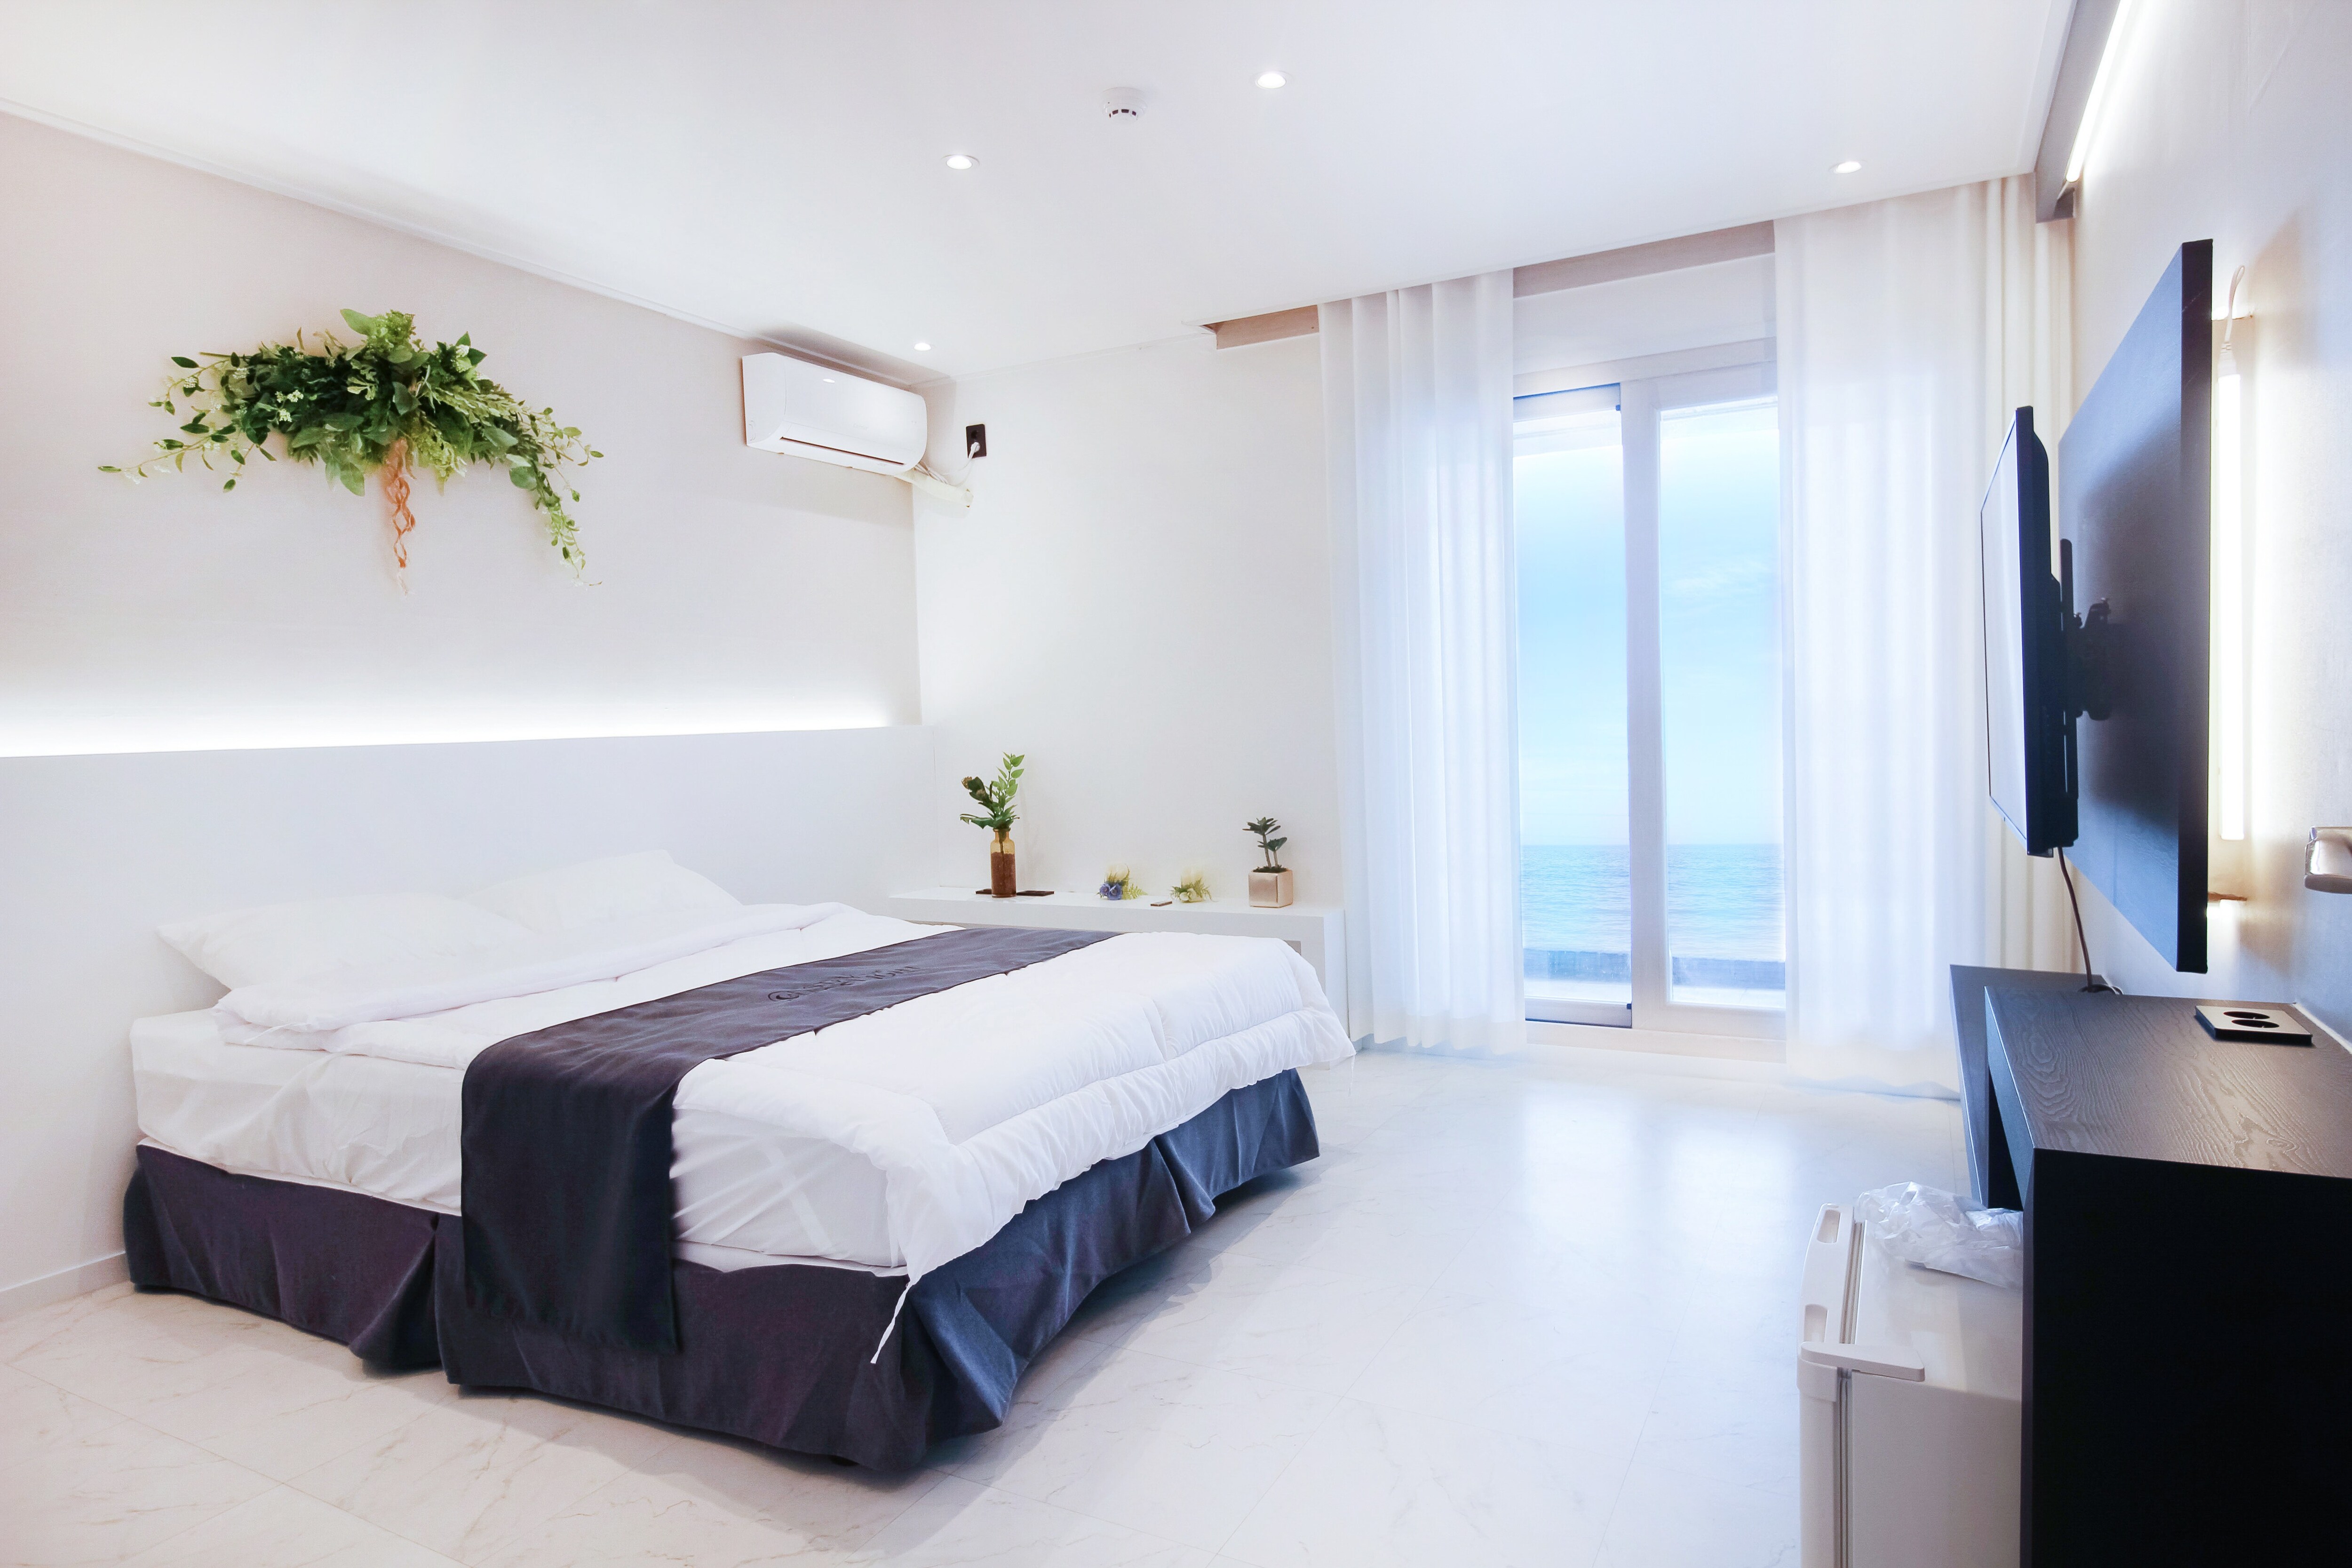 Property Image 1 - Fresh Cheerful Apartment with Ocean Views 10